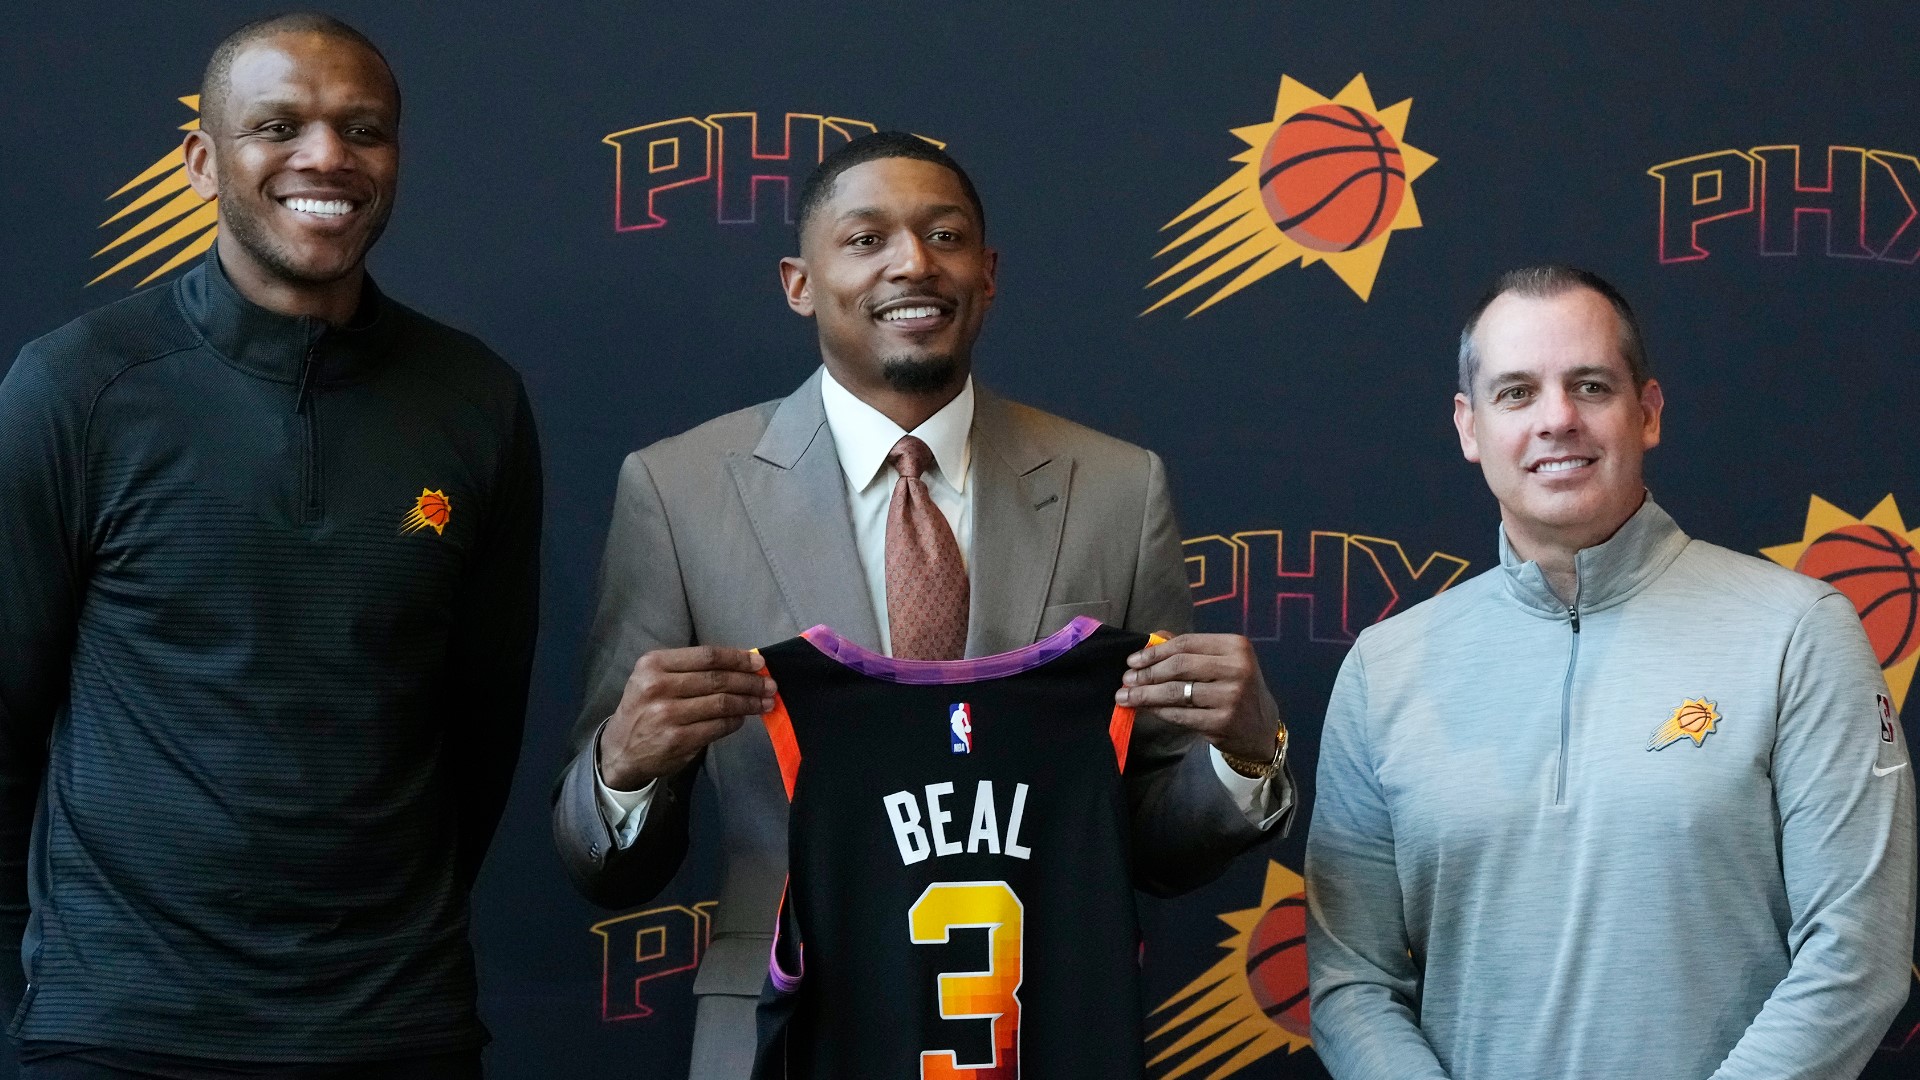 The Suns big three is officially complete as Bradley Beal met the media at a press conference Thursday. Here's what he had to say about coming to the Valley.